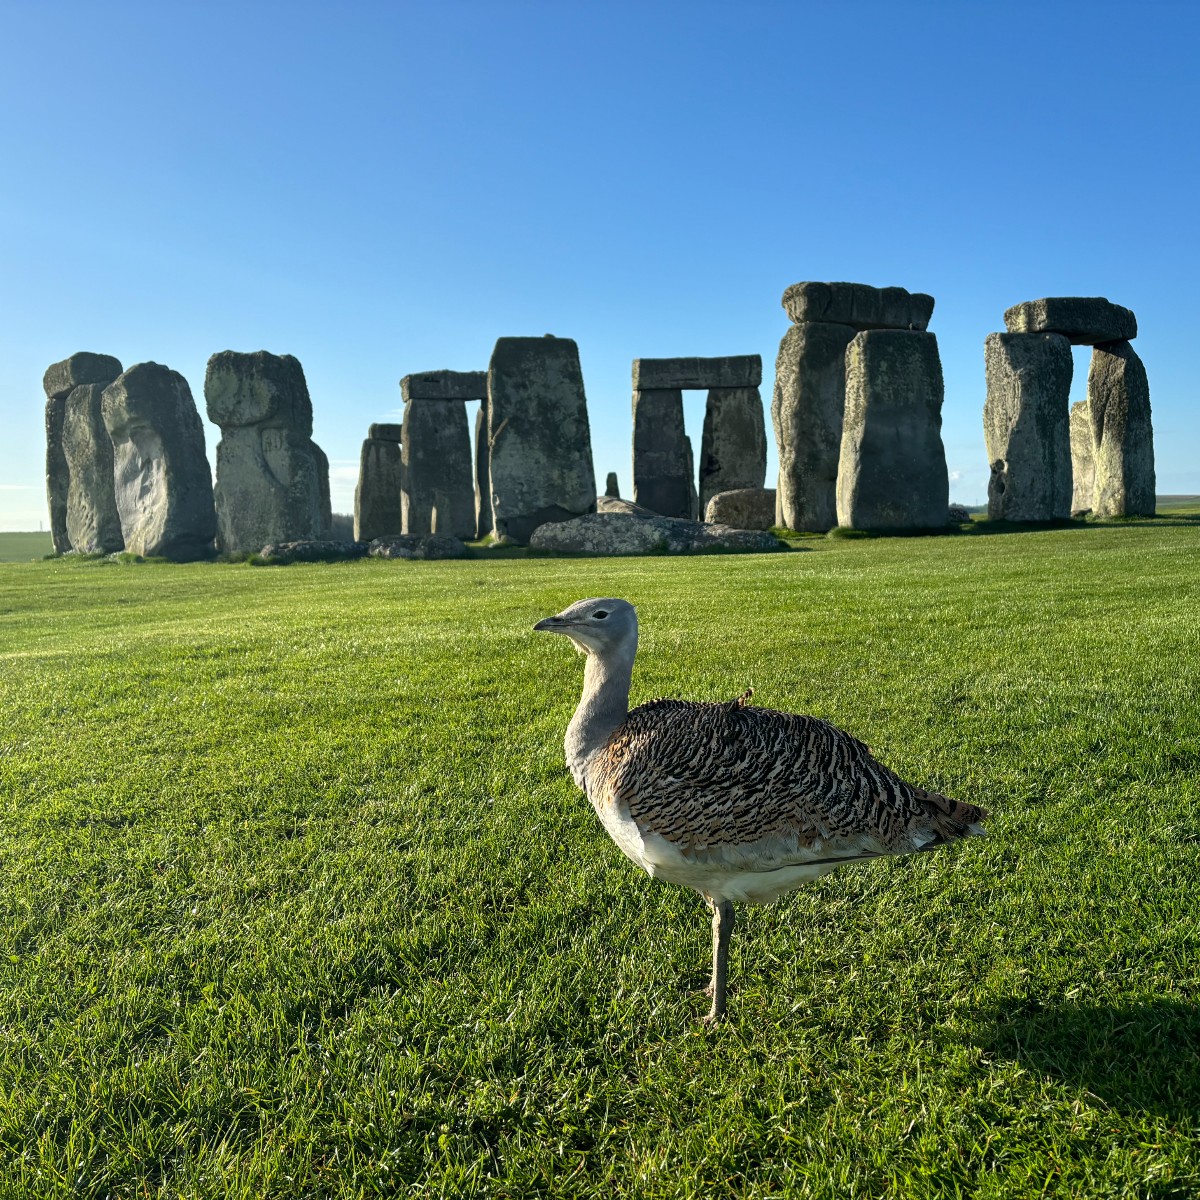 A very special bird has returned to Stonehenge! This is Gertie (Gertrude), a female Great Bustard. If you see Gertie during your visit, remember to give her plenty of space.

Find out more about the group working to protect the Great Bustard ➡️ greatbustard.org